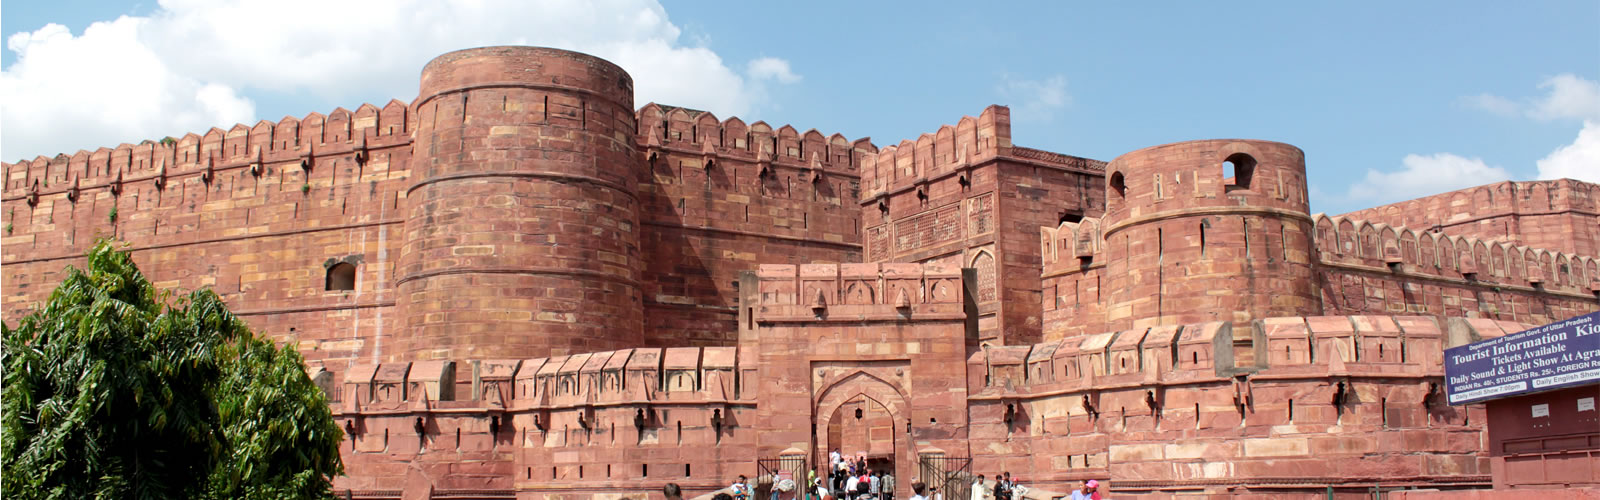 Agra Fort Pics, Man Made Collection